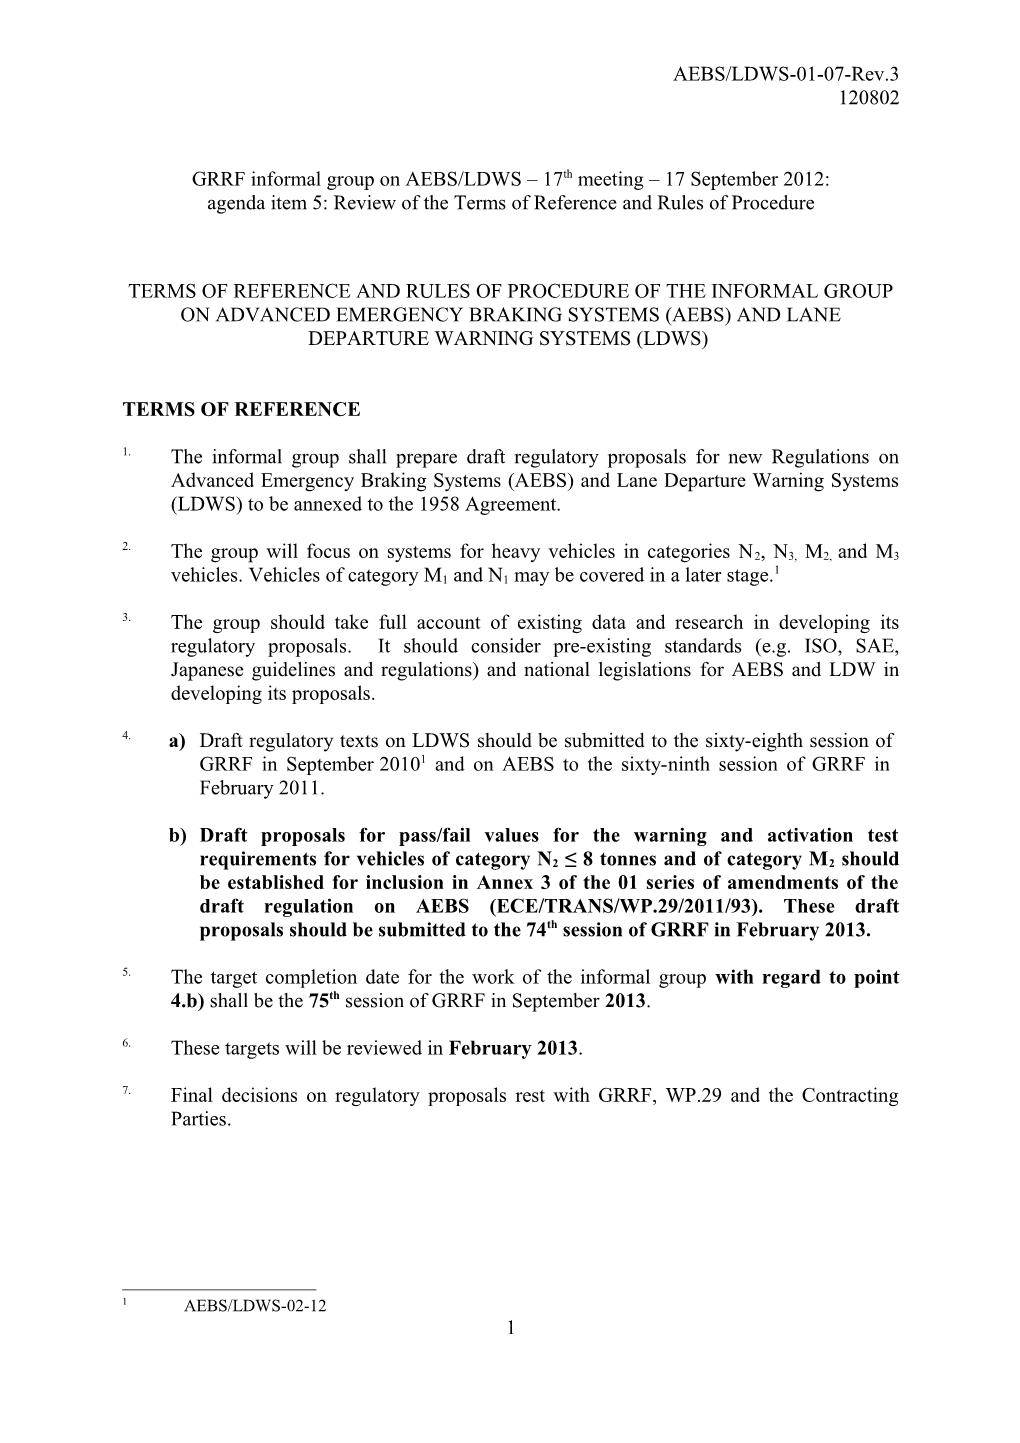 AEBS/LDWS 3Rd Meeting: Item 6 of the Agenda: Update of the Terms of Reference and Rules